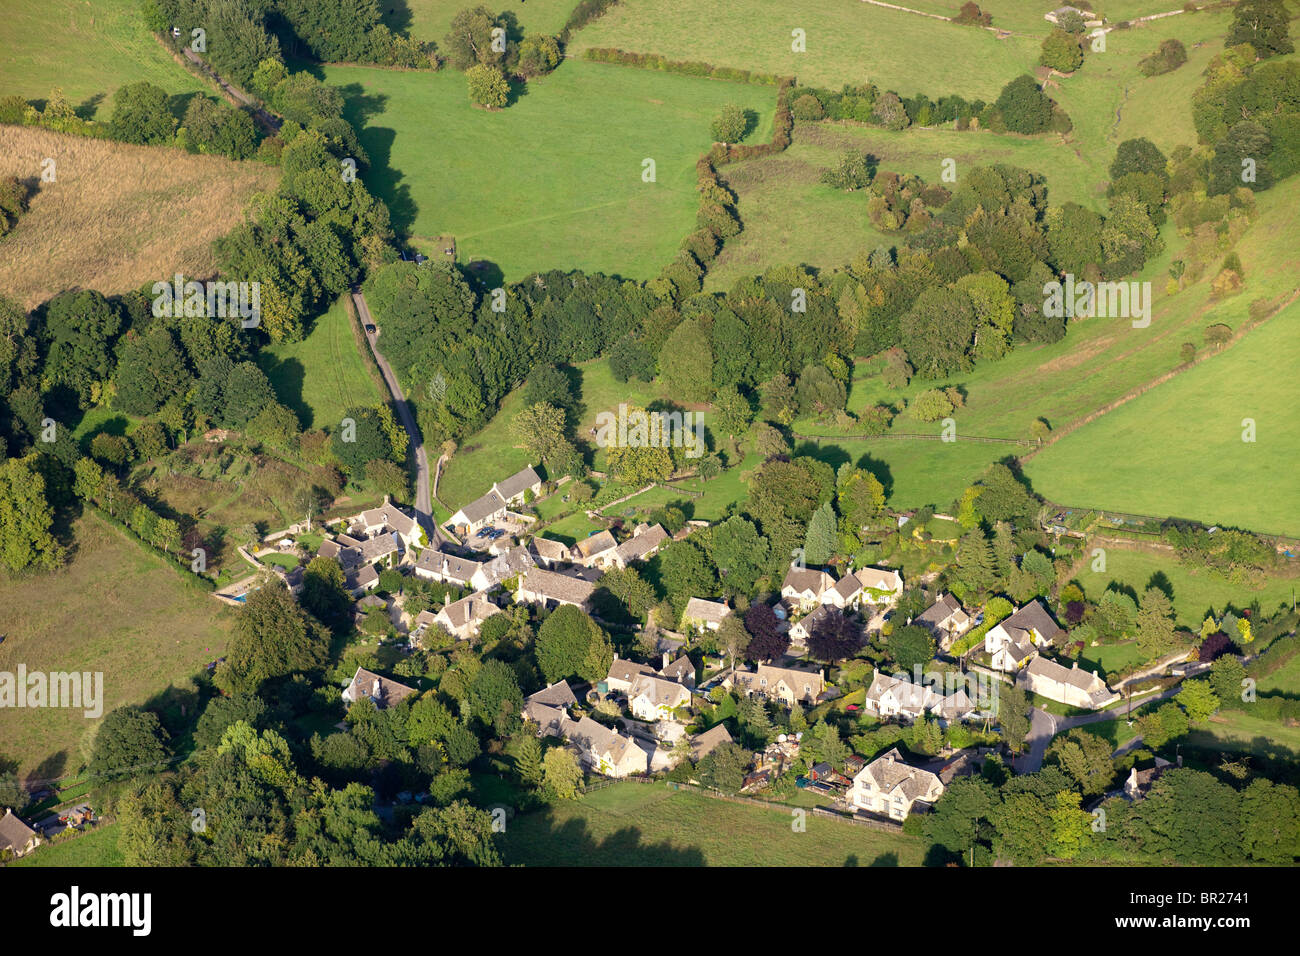 An aerial view of the Cotswold village of Duntisbourne Leer, Gloucestershire from the west. Stock Photo